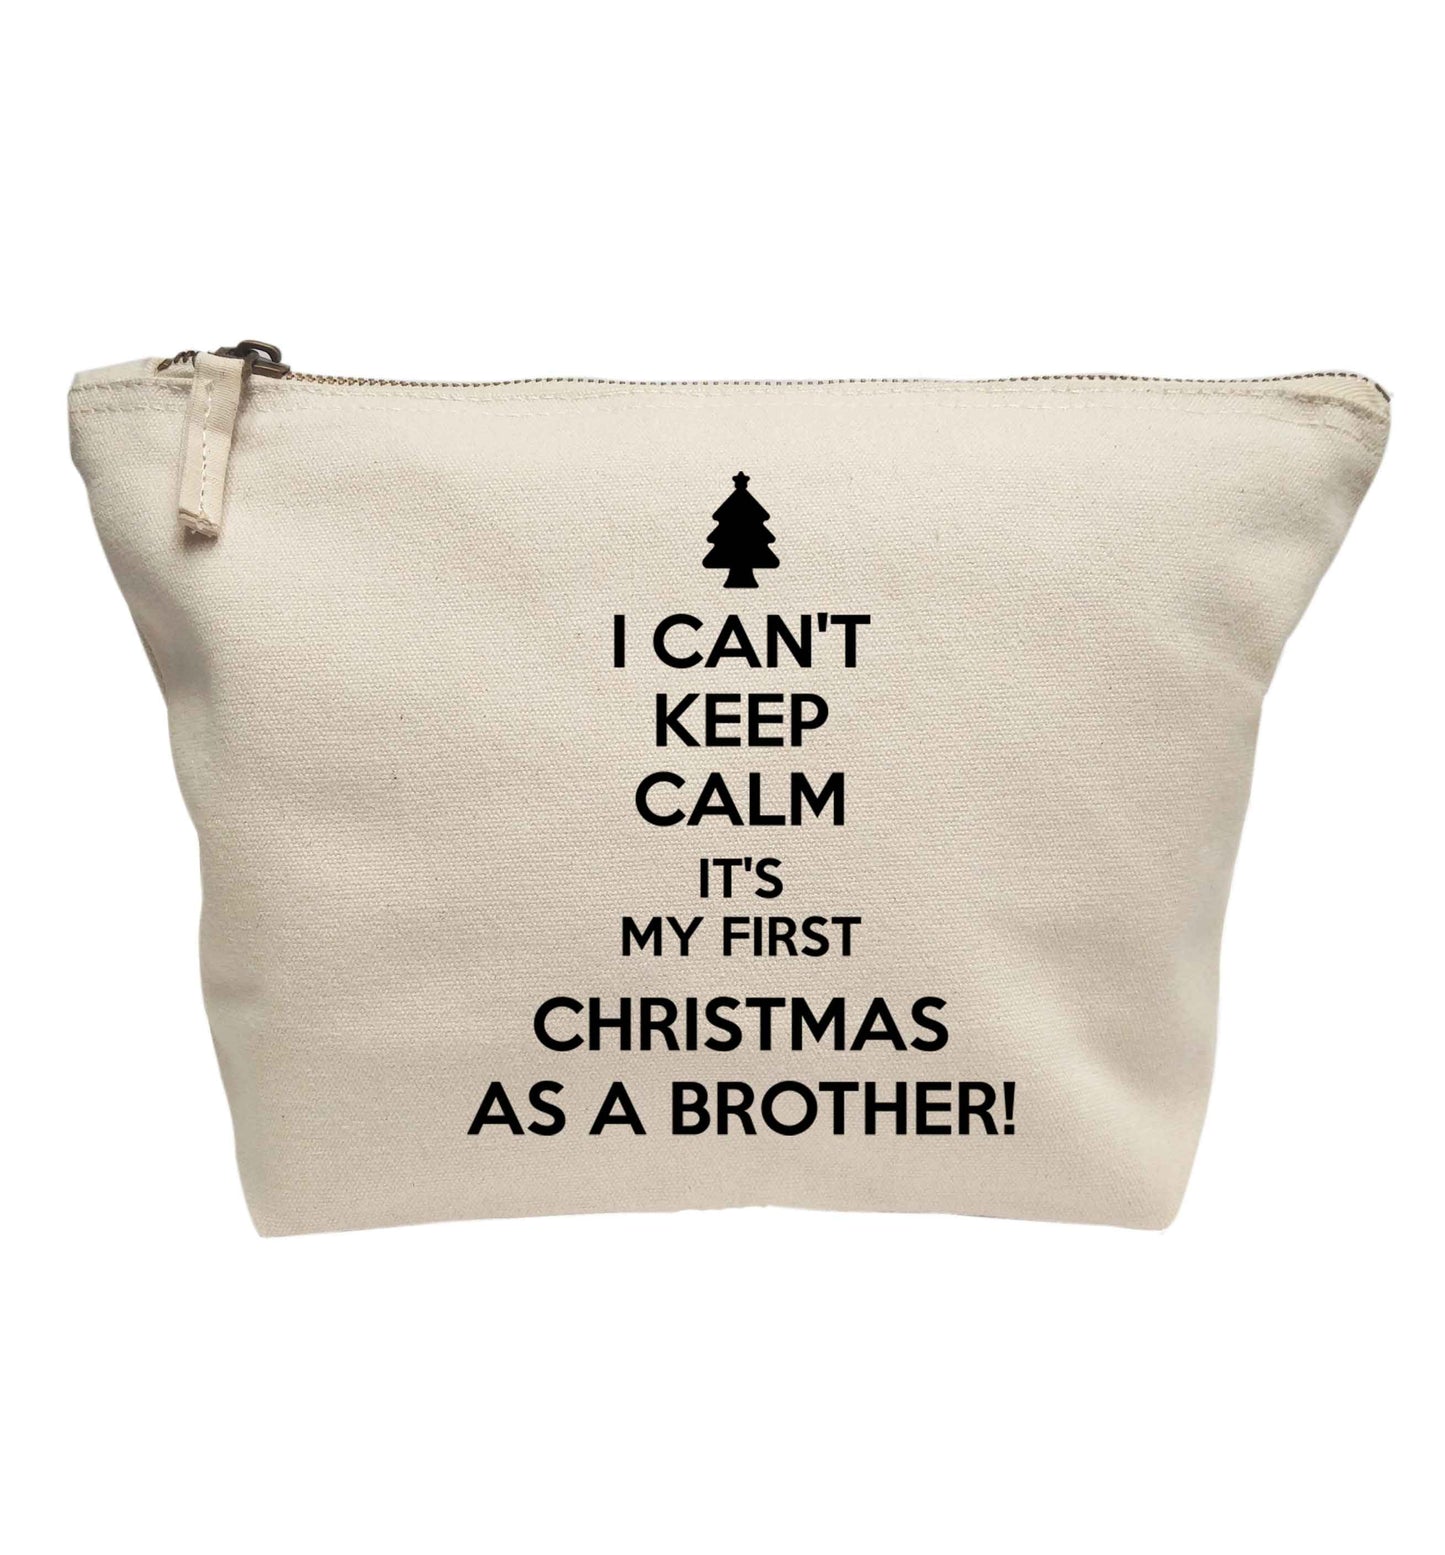 I can't keep calm it's my first Christmas as a brother! | makeup / wash bag